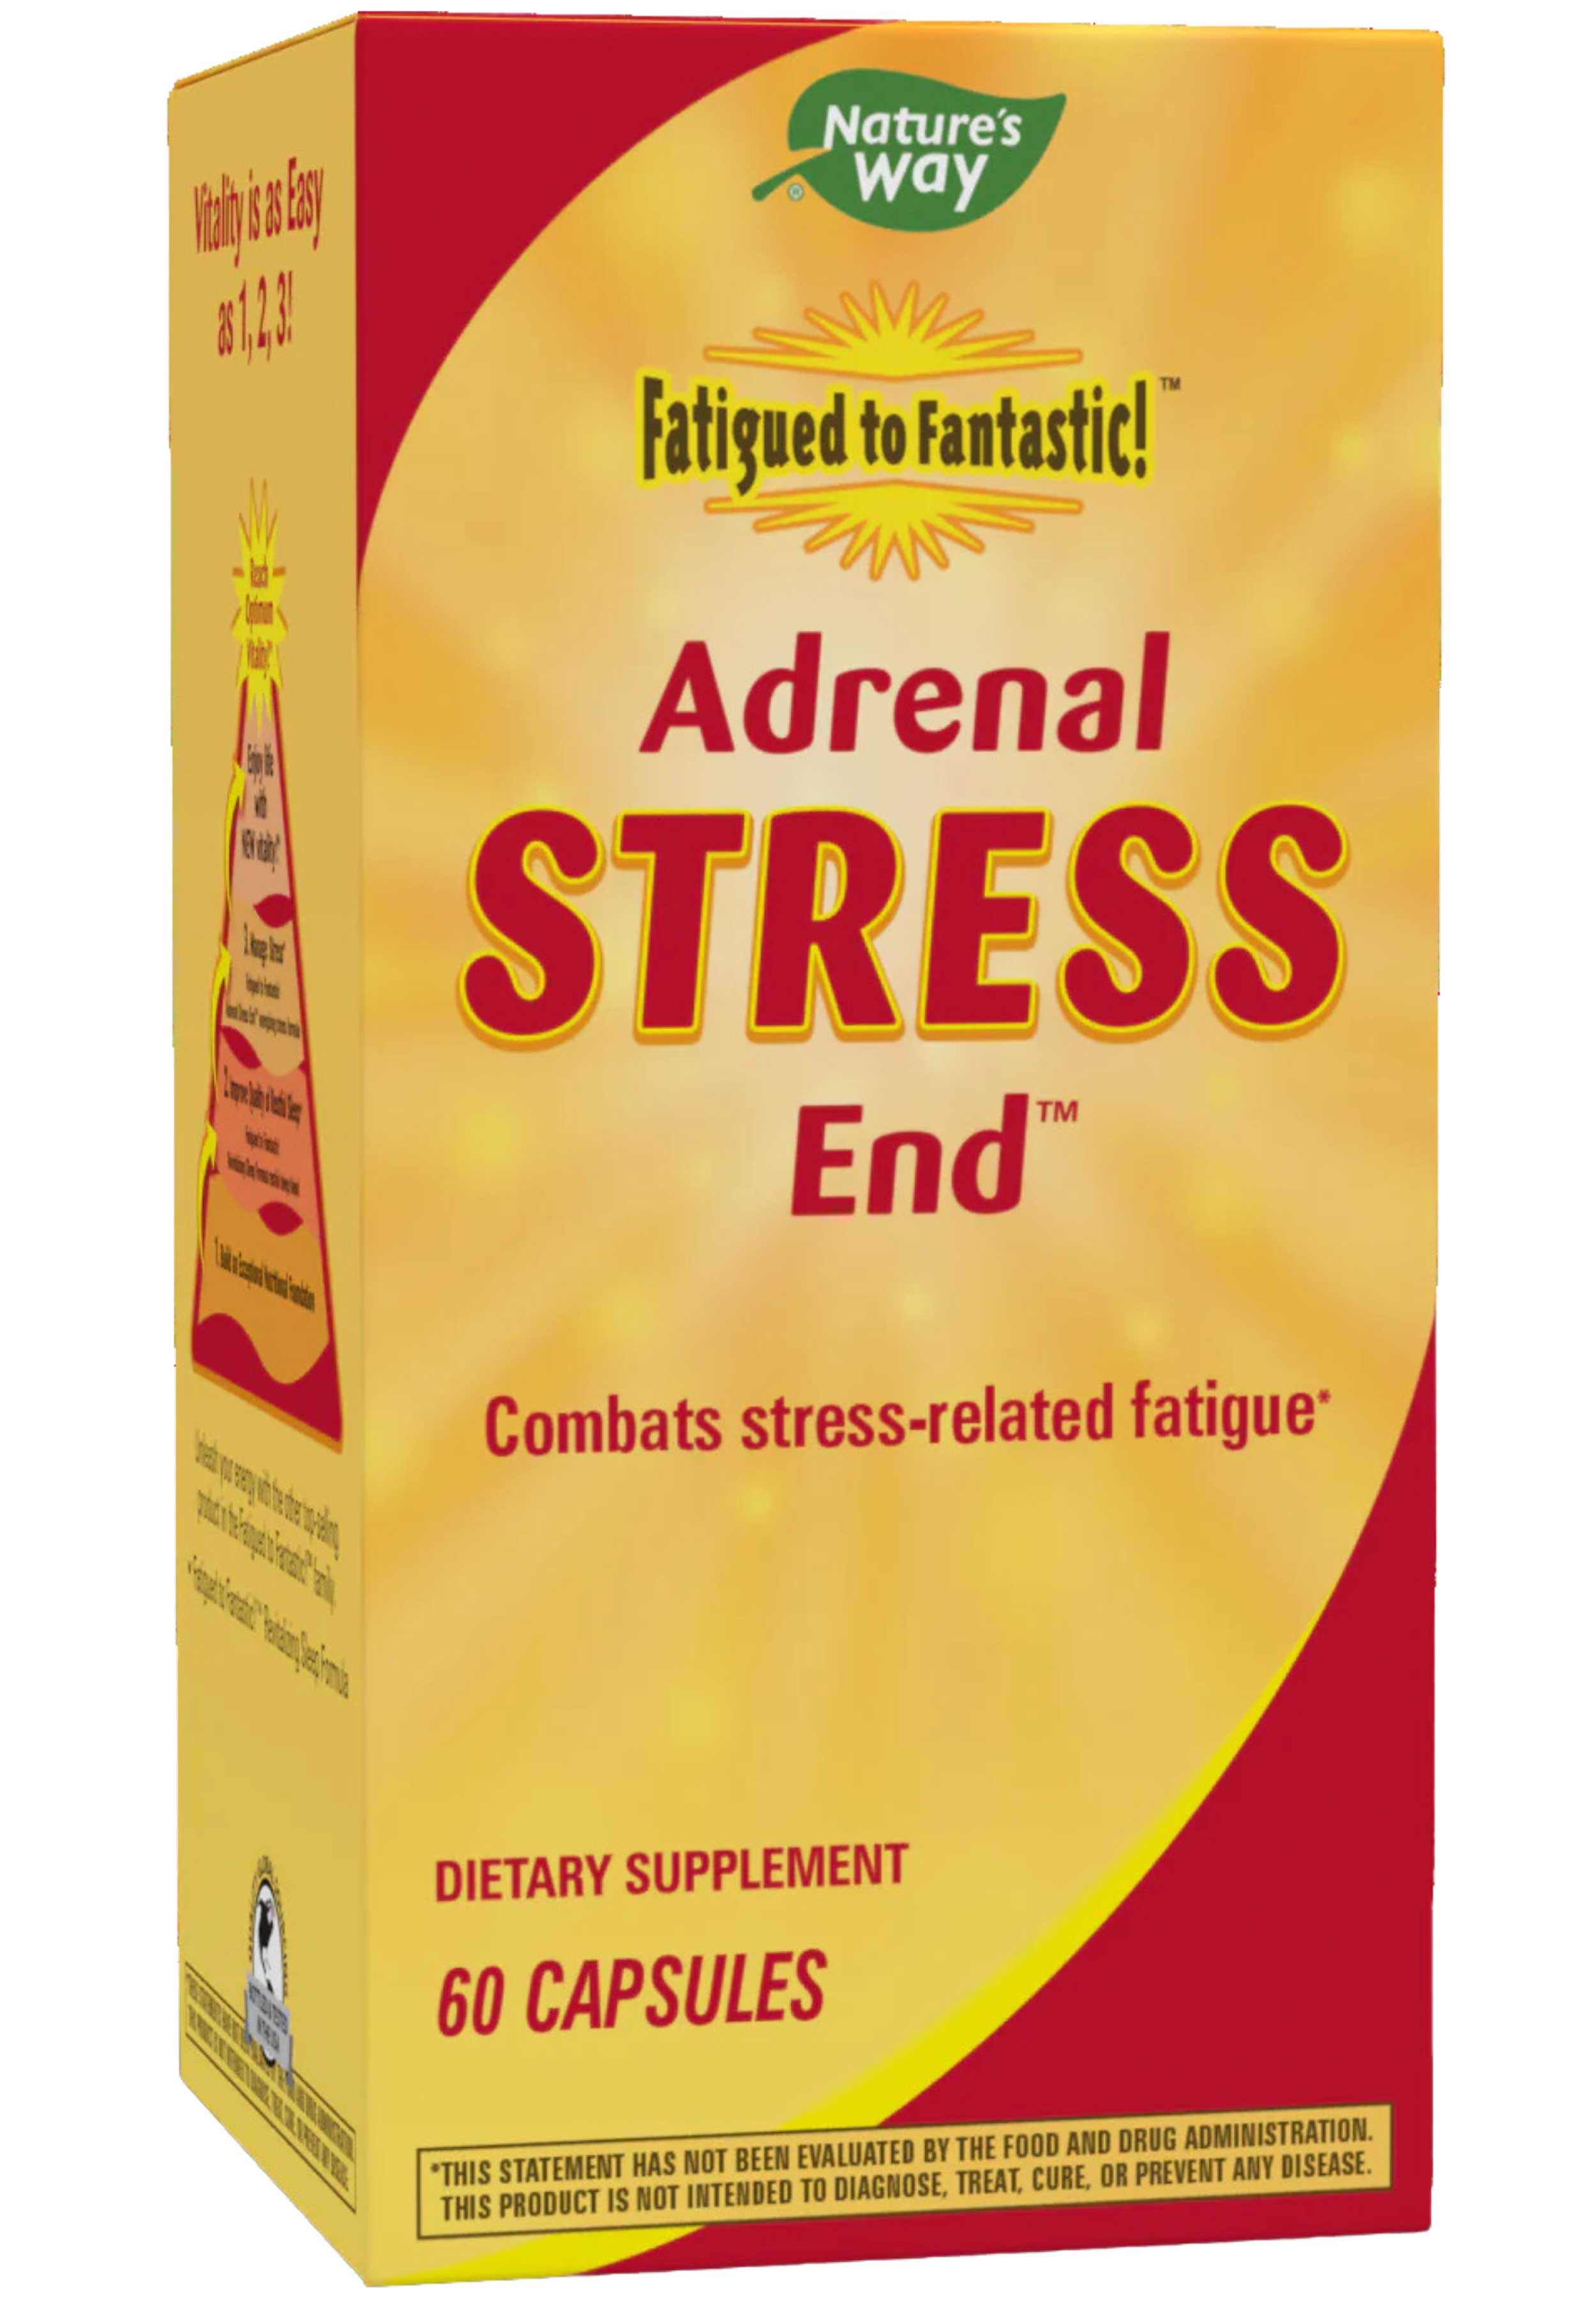 Nature's Way Fatigued to Fantastic! Adrenal Stress End